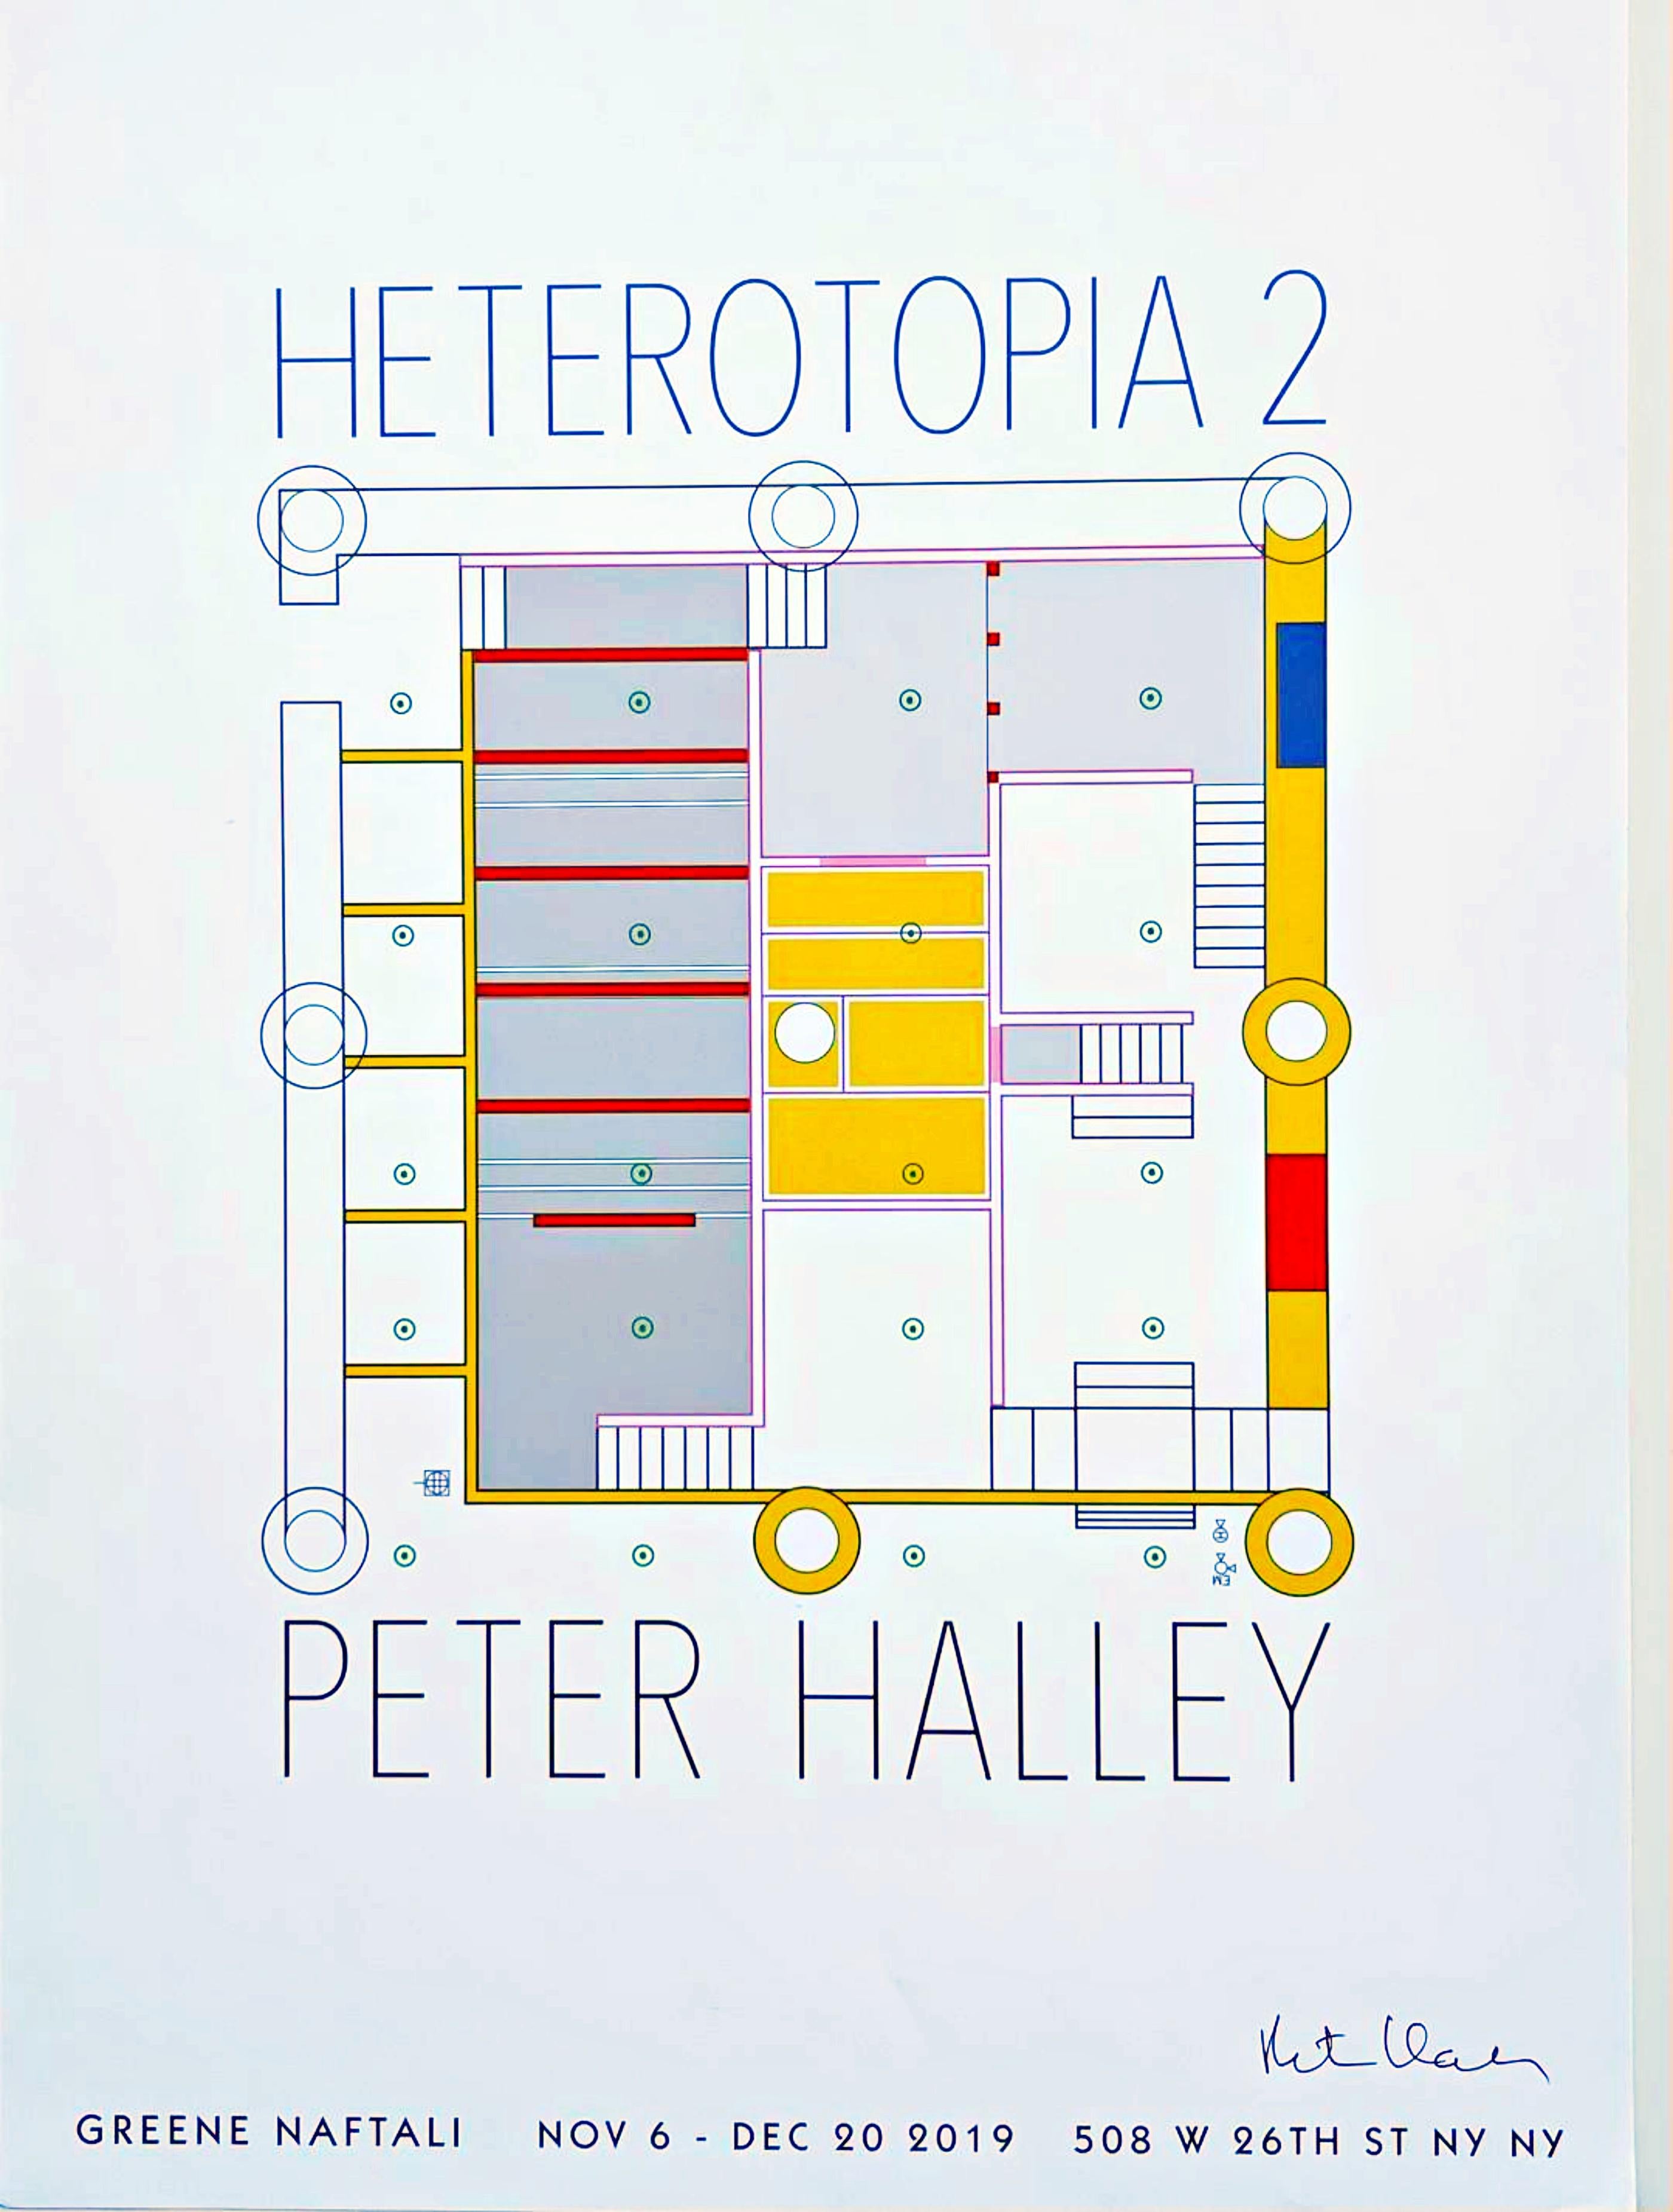 Peter Halley
Heterotopia 2 (Hand Signed by Peter Halley), 2019
Offset lithograph poster (Hand signed by Peter Halley)
23 × 16 1/2 inches. Signed in black marker on the front
Published by Greene Naftali, New York
Unframed
Alpha 137 Gallery is honored